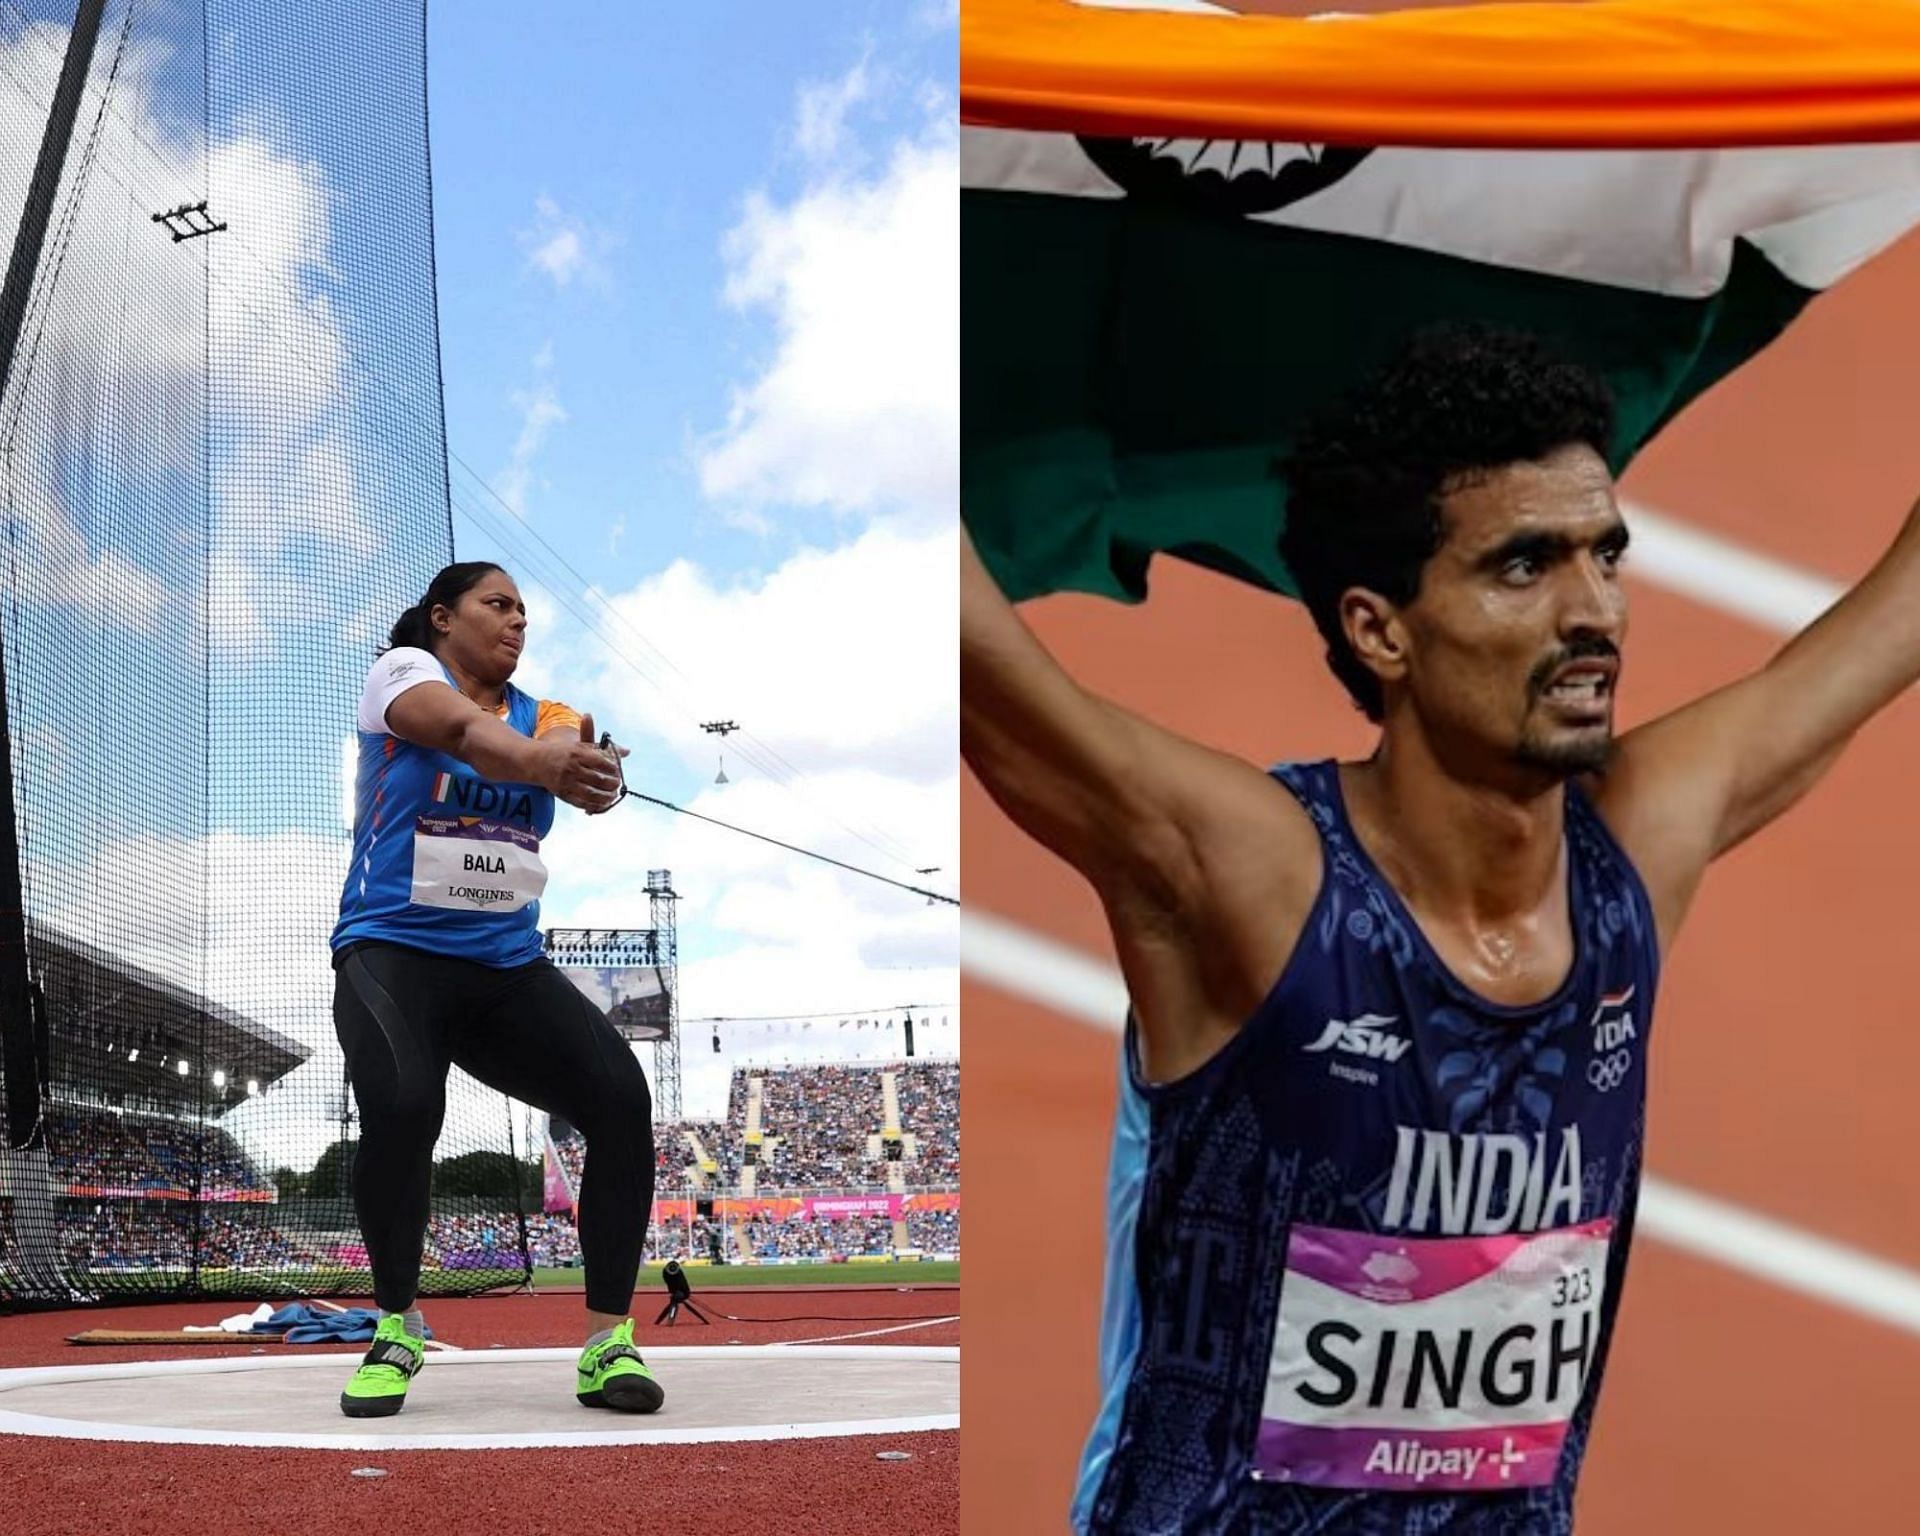 Manju Bala and Gulveer Singh. (Image Credit: Getty Images and Asian Games Official Website)